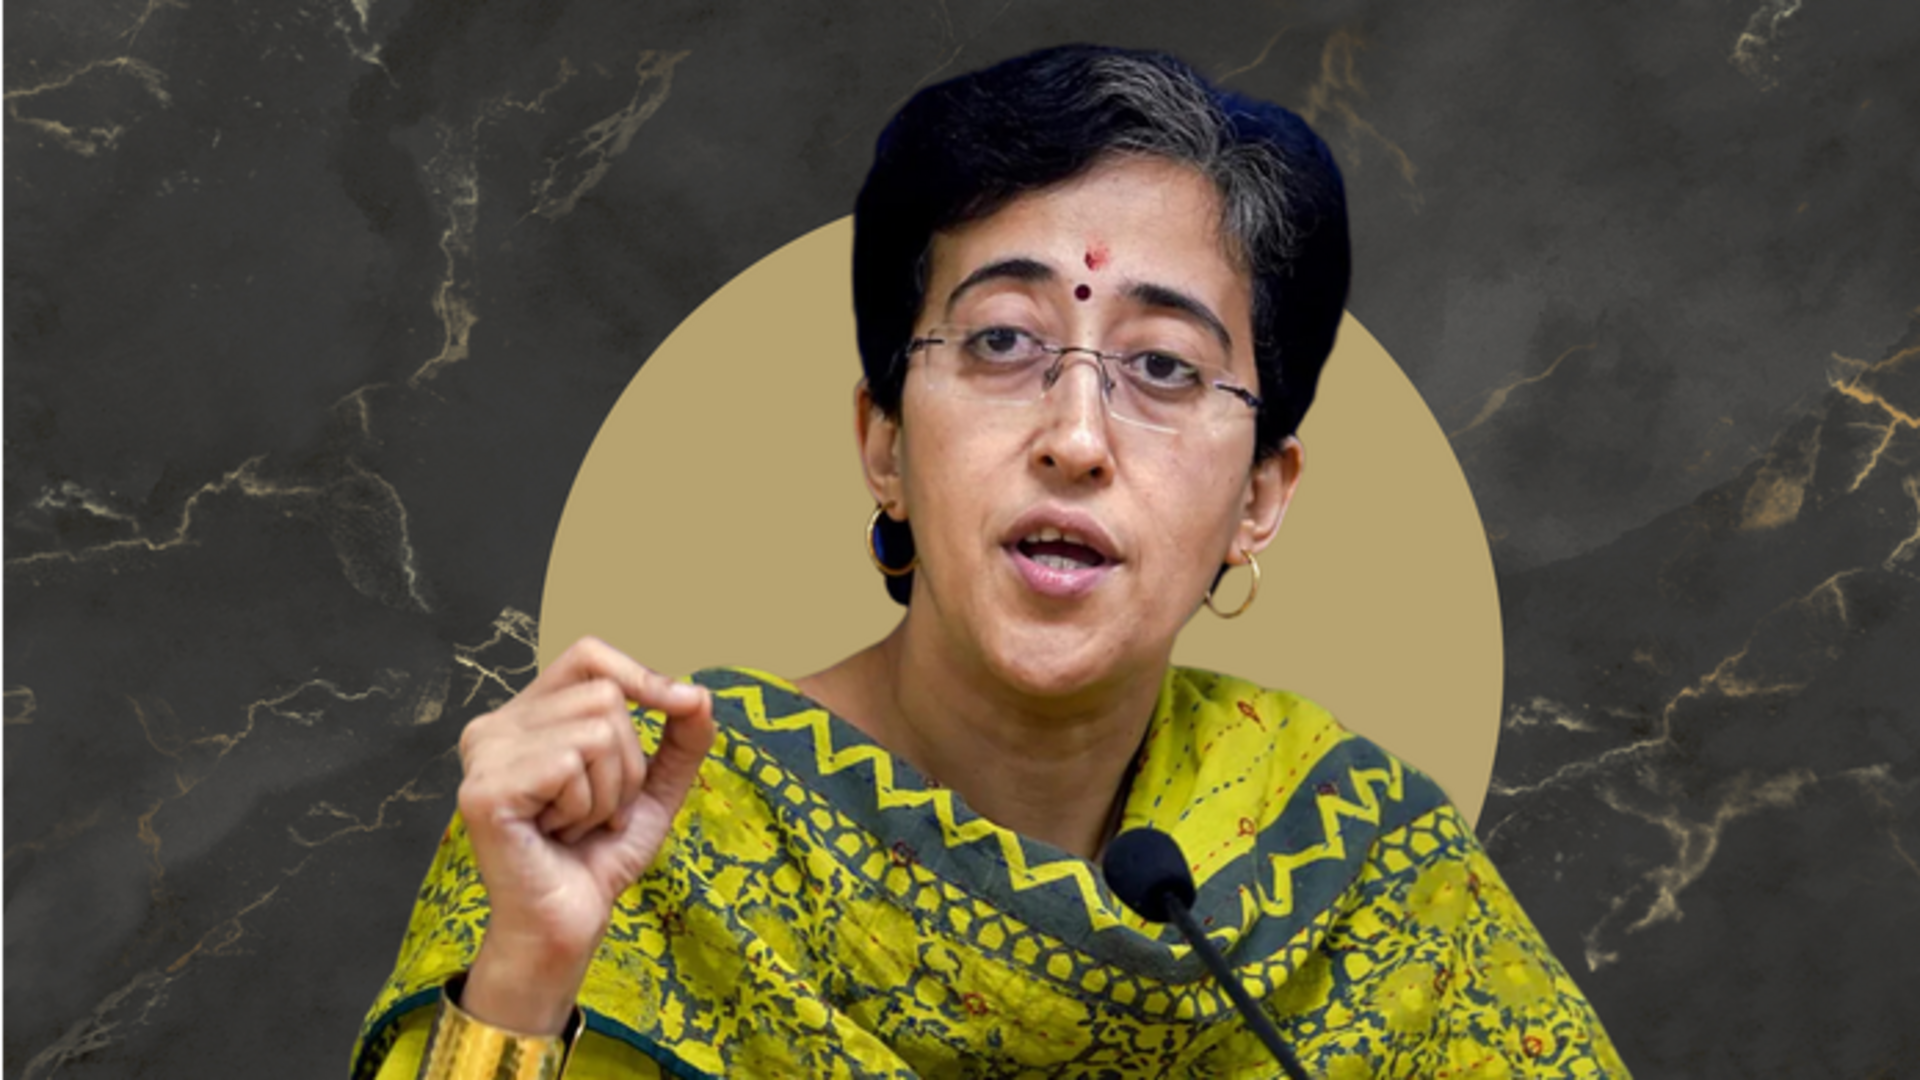 Rs. 850cr scam: AAP's Atishi recommends dismissal of top bureaucrats